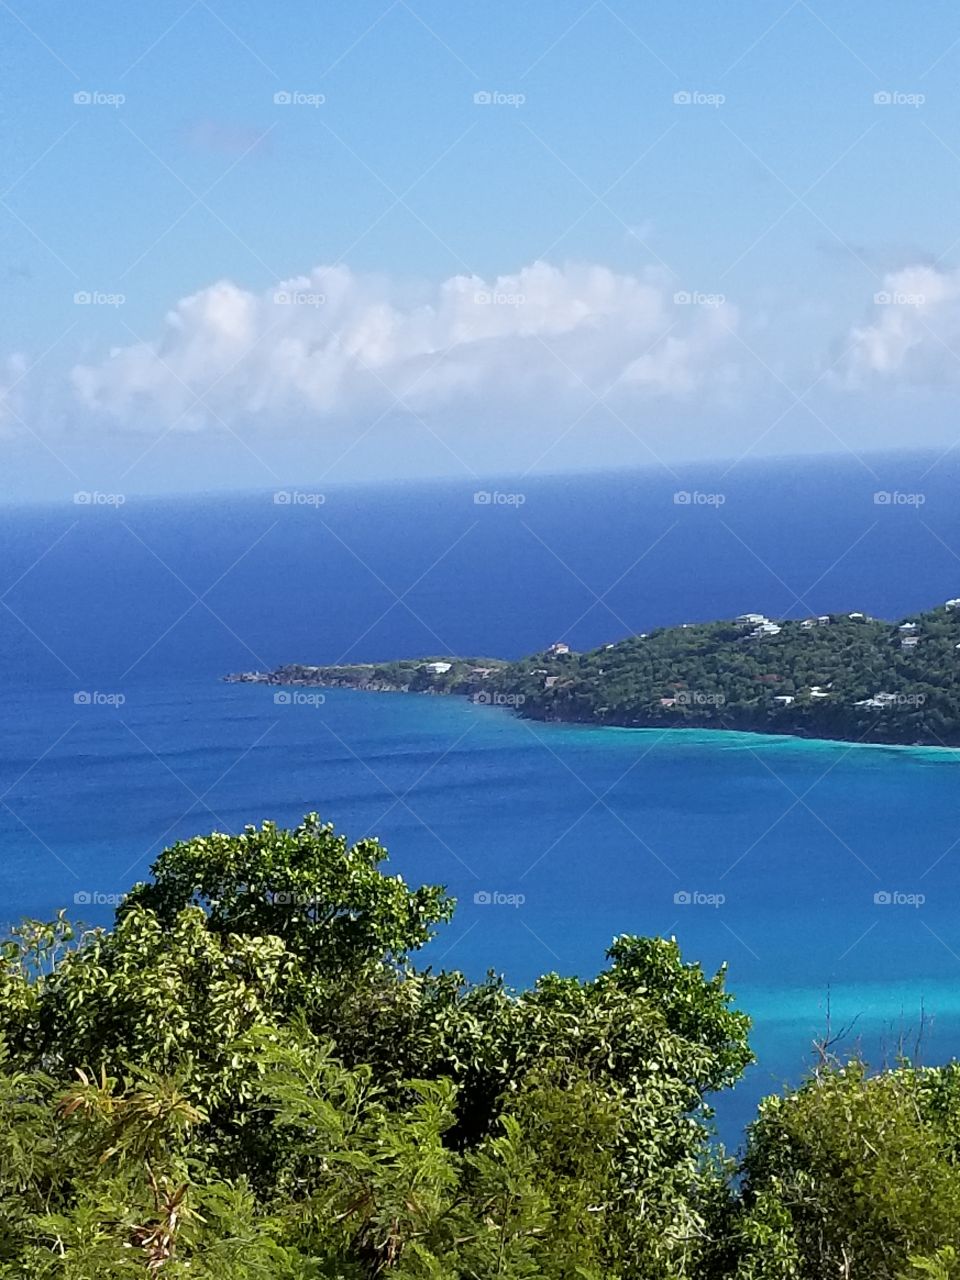 Beautiful picture of St Thomas Island.